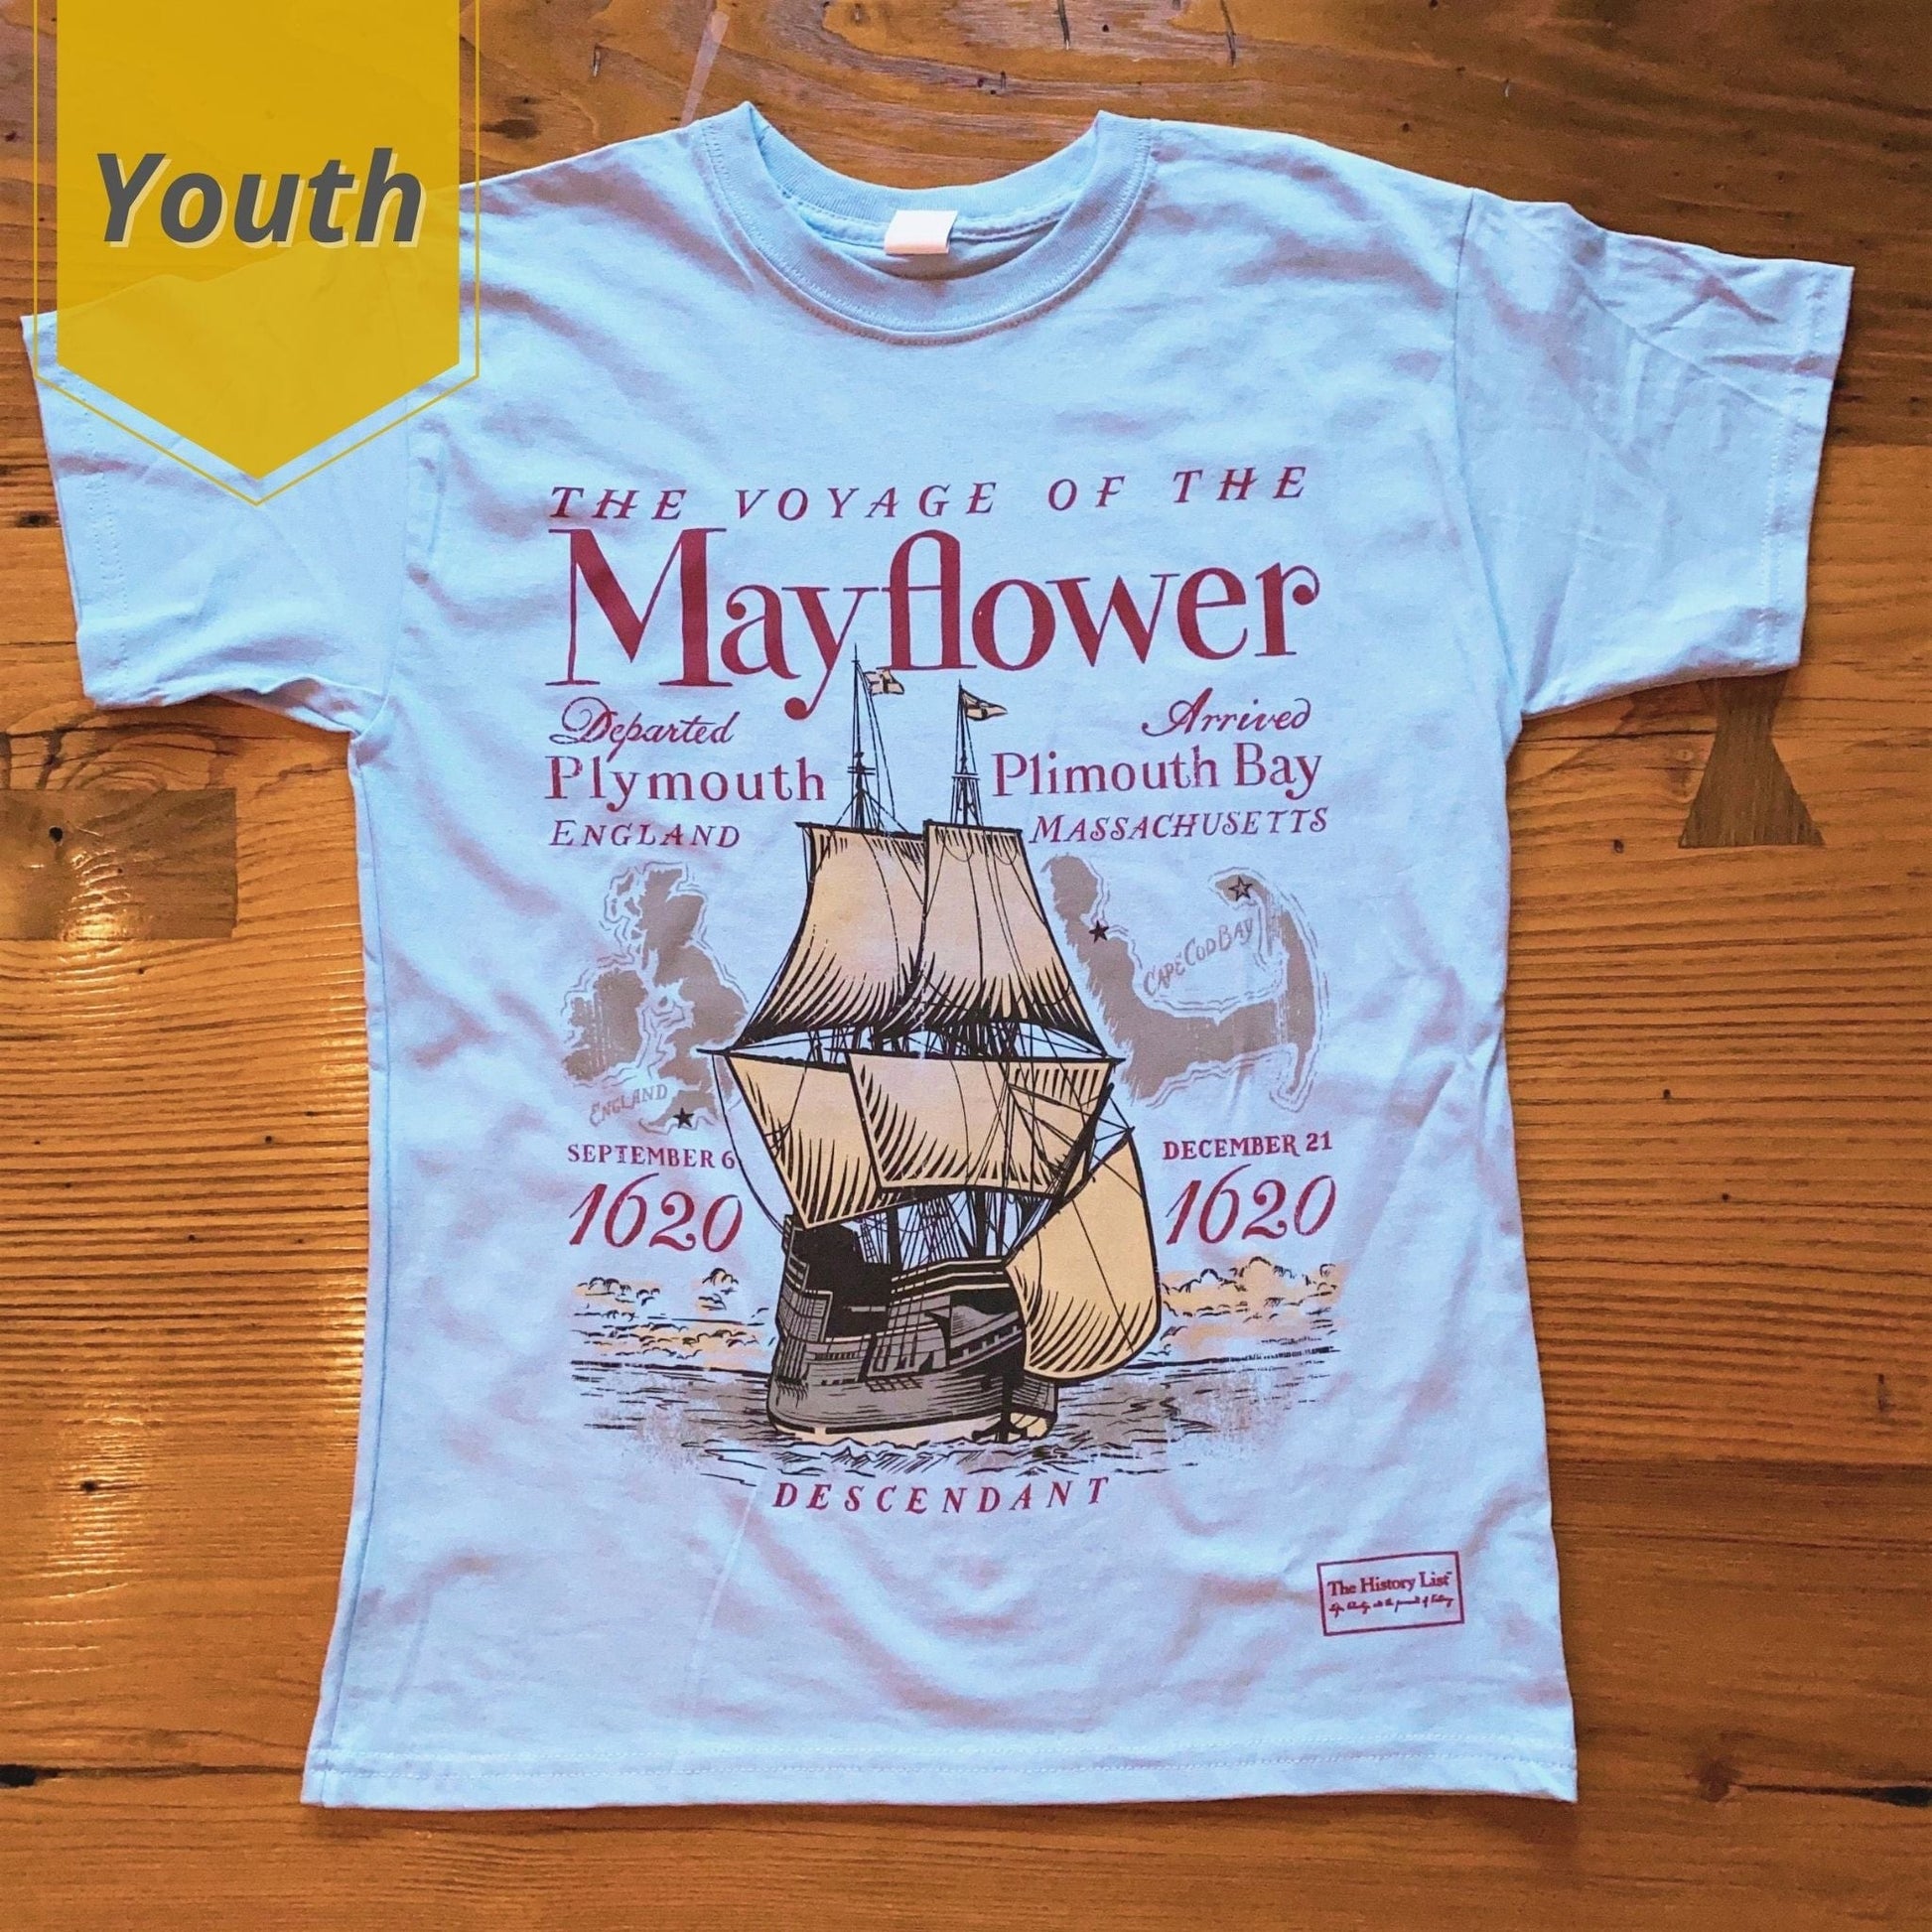 "The Voyage of the Mayflower" Shirt in Youth sizes from the history list store